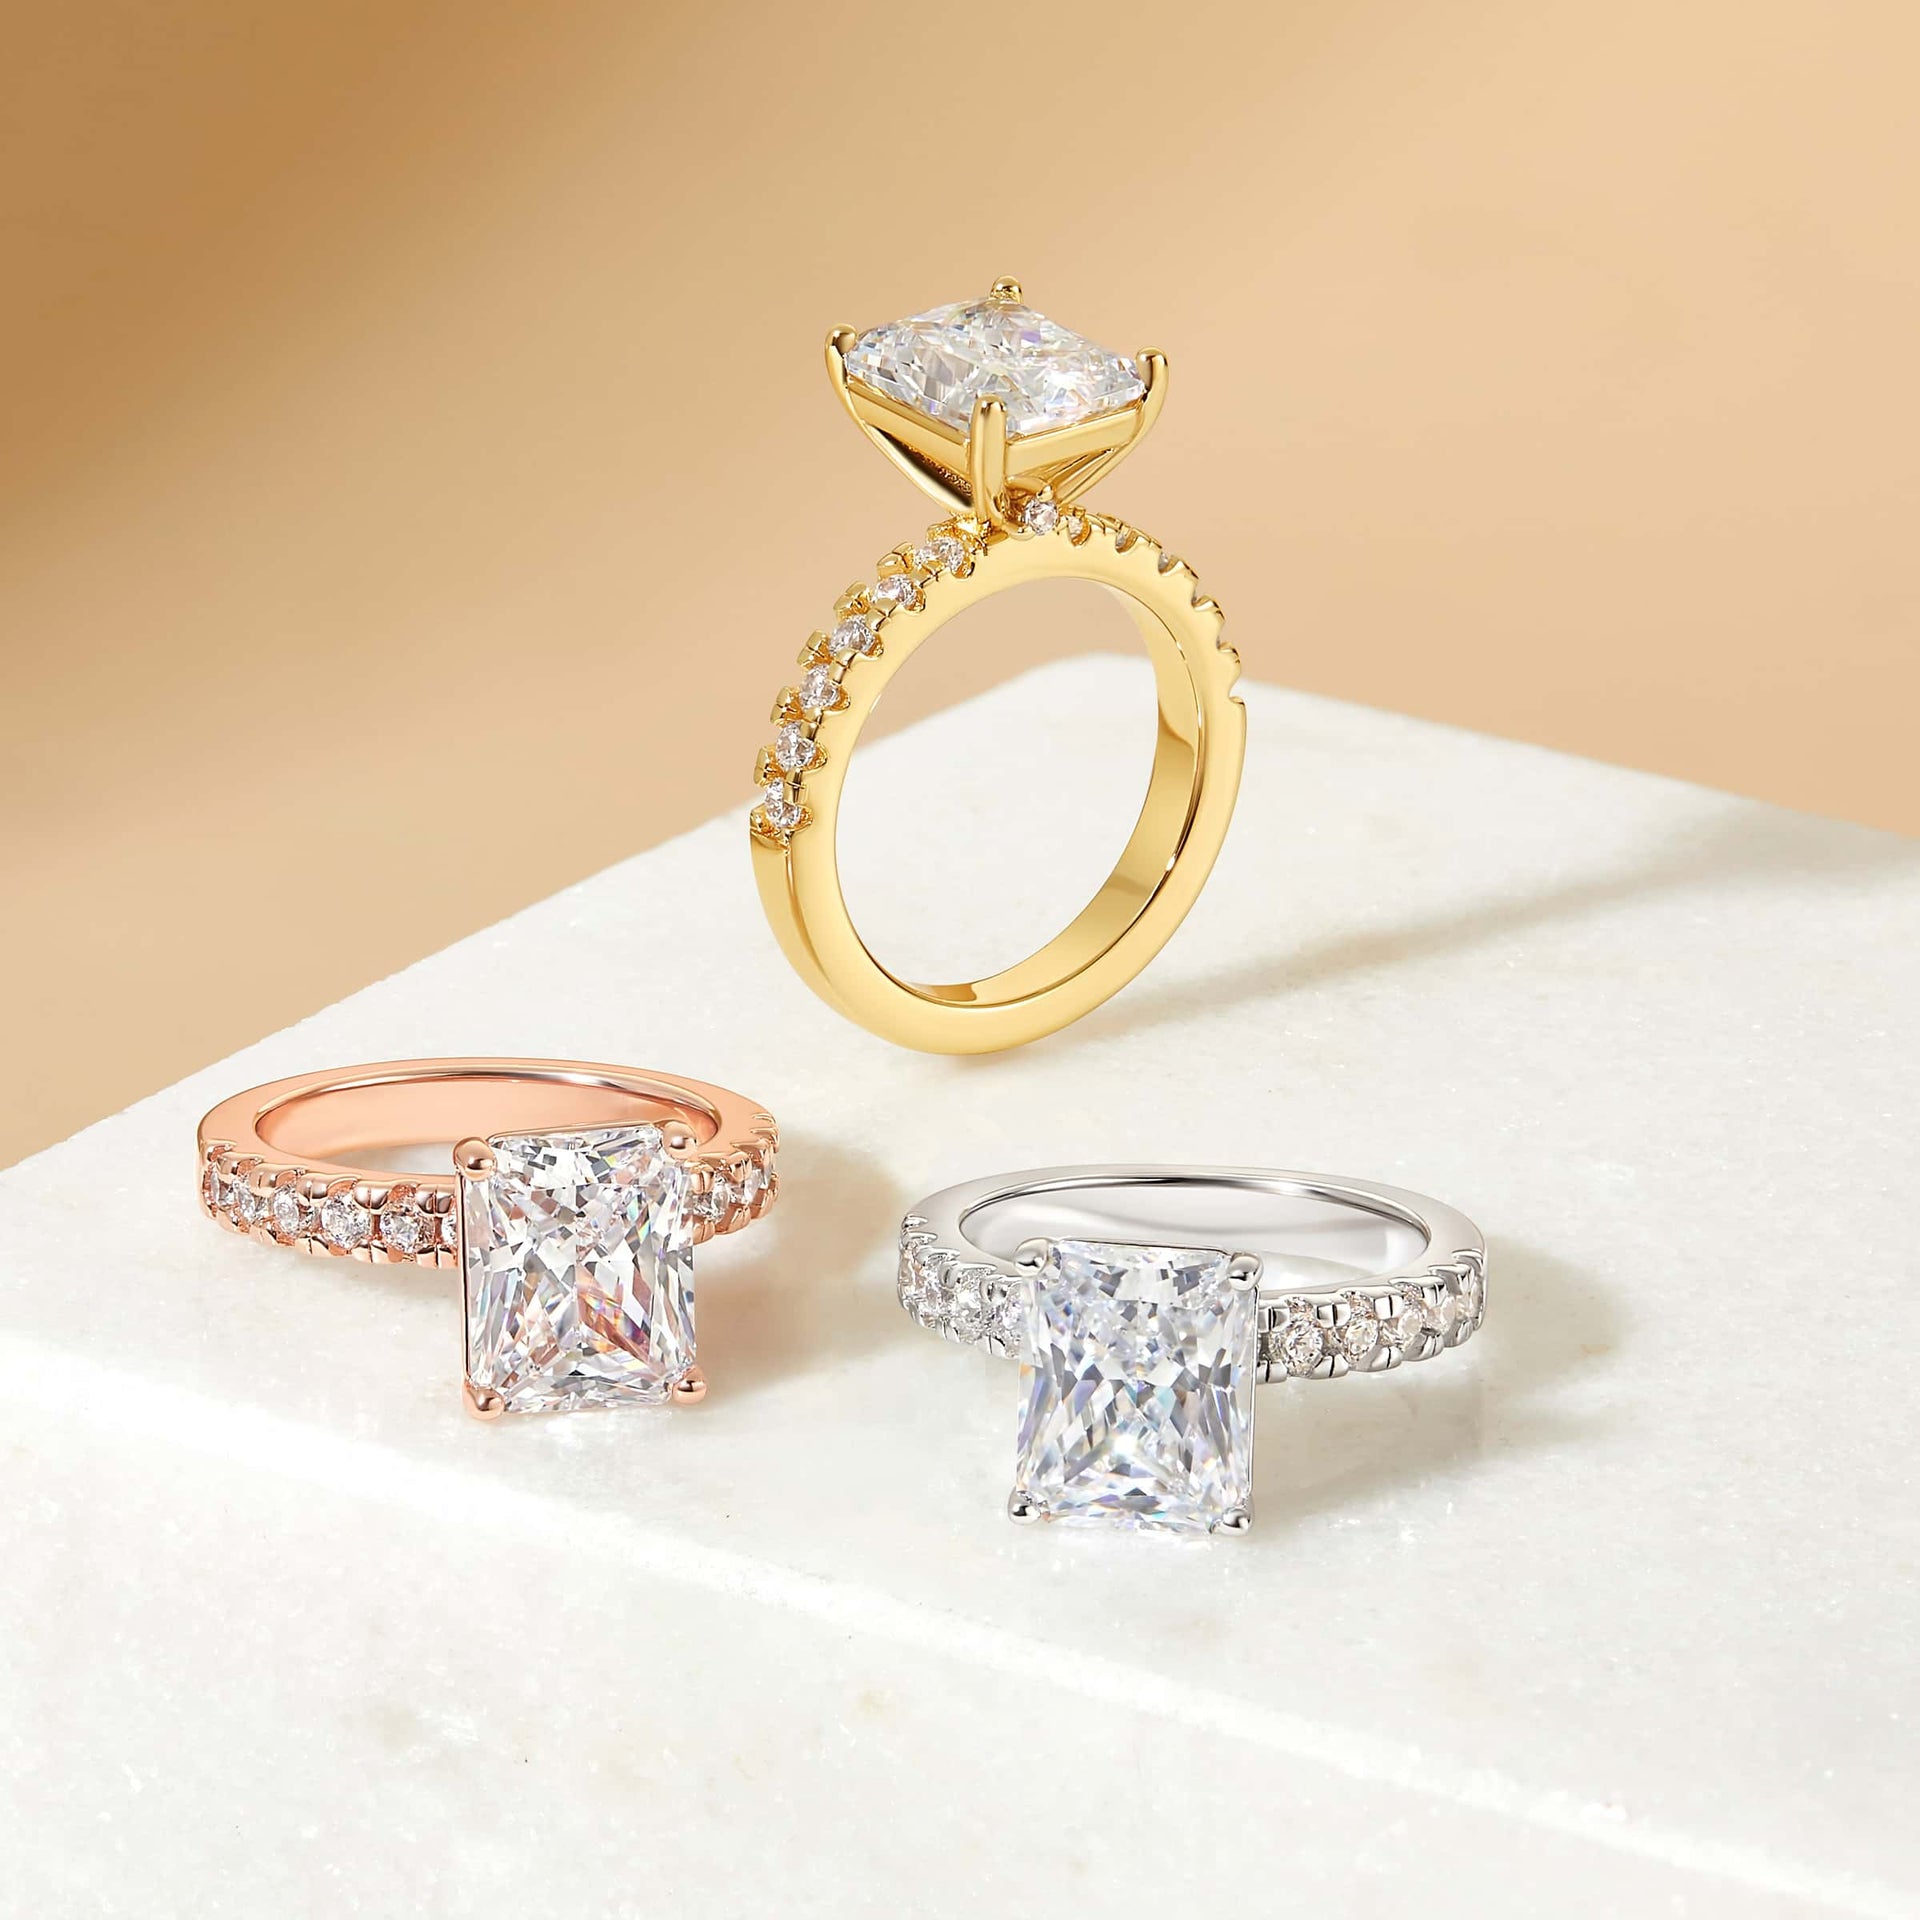 3.75 carat radiant cut engagement ring with sparkly half eternity band shown in its three variants of silver, gold, and rose gold on a neutral stone background